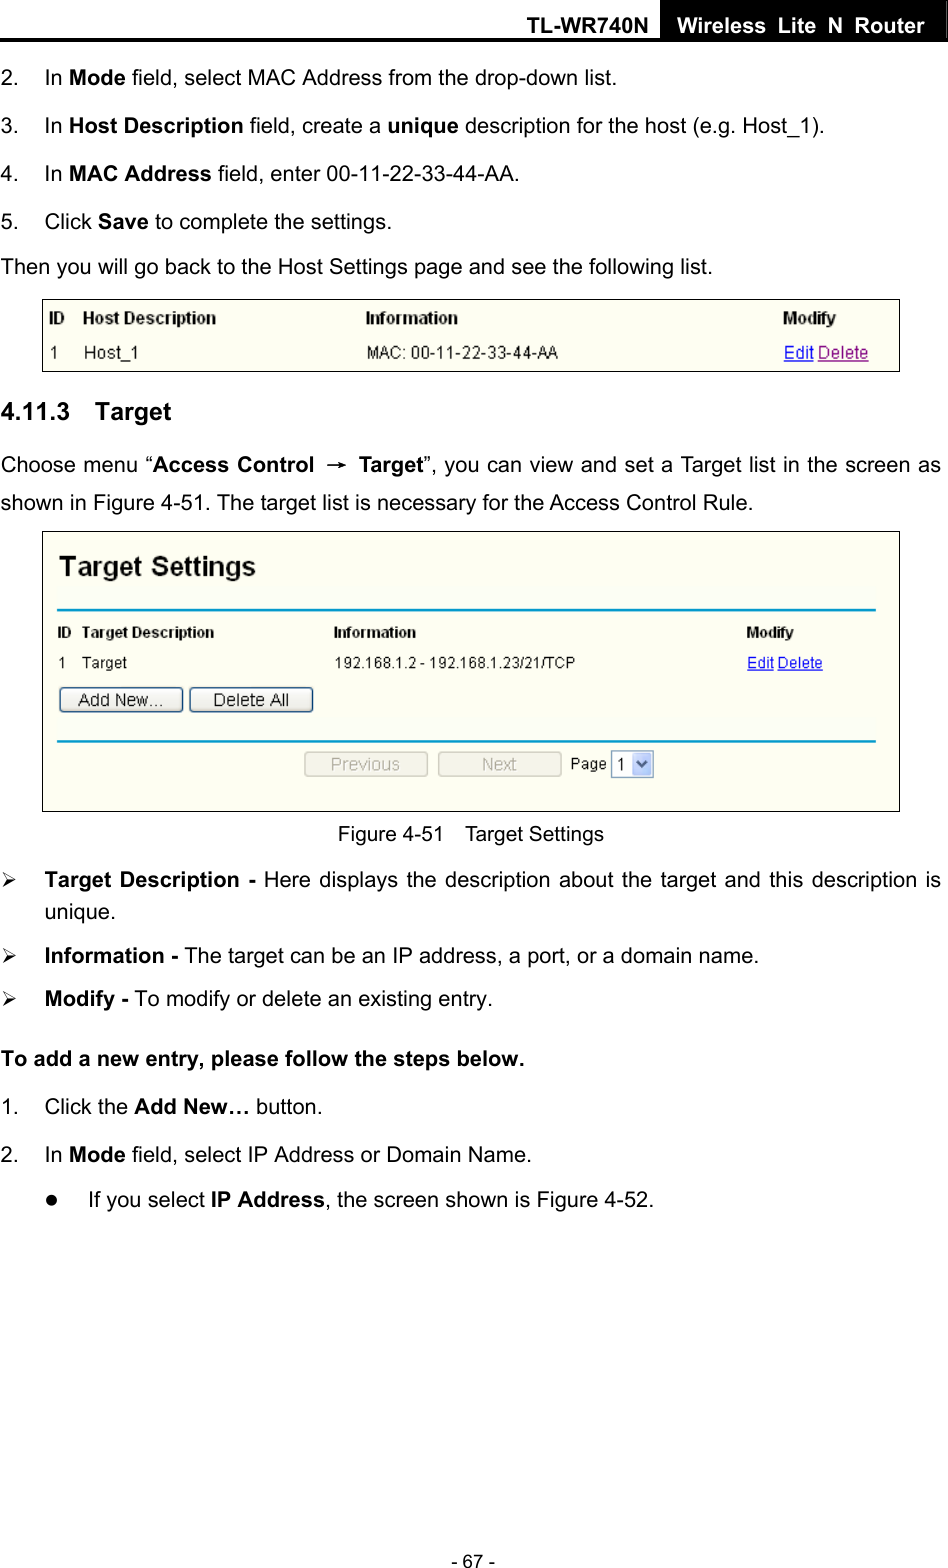 TL-WR740N Wireless Lite N Router  - 67 - 2. In Mode field, select MAC Address from the drop-down list.   3. In Host Description field, create a unique description for the host (e.g. Host_1).   4. In MAC Address field, enter 00-11-22-33-44-AA.   5. Click Save to complete the settings.   Then you will go back to the Host Settings page and see the following list.  4.11.3  Target Choose menu “Access Control  → Target”, you can view and set a Target list in the screen as shown in Figure 4-51. The target list is necessary for the Access Control Rule.  Figure 4-51  Target Settings ¾ Target Description - Here displays the description about the target and this description is unique.  ¾ Information - The target can be an IP address, a port, or a domain name.   ¾ Modify - To modify or delete an existing entry. To add a new entry, please follow the steps below. 1. Click the Add New… button. 2. In Mode field, select IP Address or Domain Name. z If you select IP Address, the screen shown is Figure 4-52.   